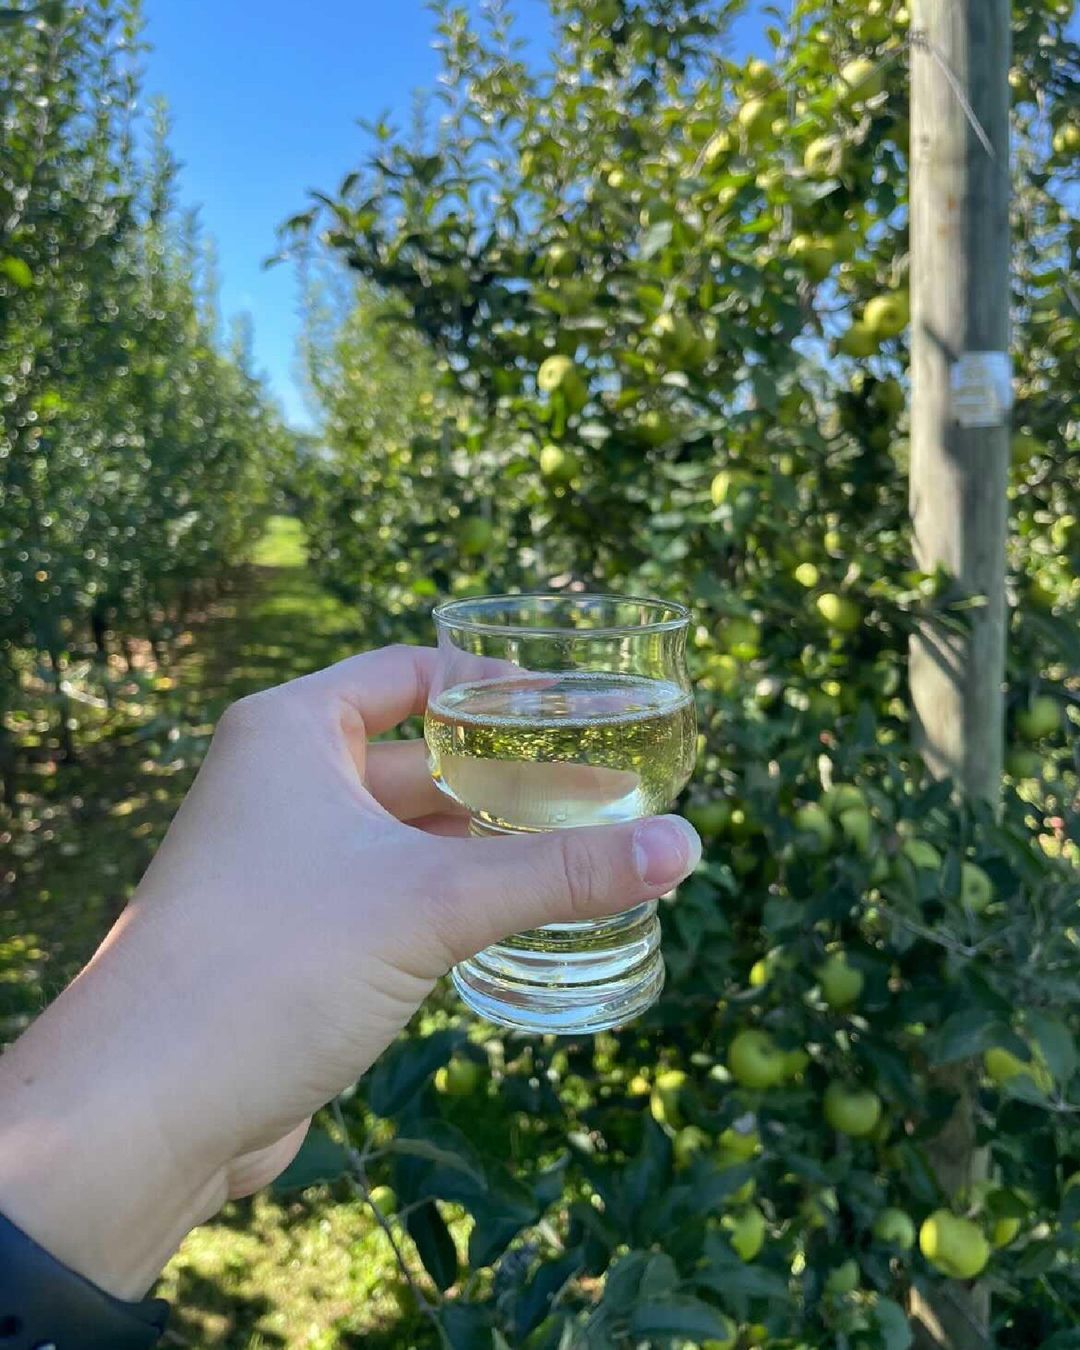 @jlfarmandcidery is more than just another cider maker to add to the list. It’s an experience, rooted in decades of passion to take what is grown on the family farm and share it with others.
No matter what your favorite cider is, they have something tha